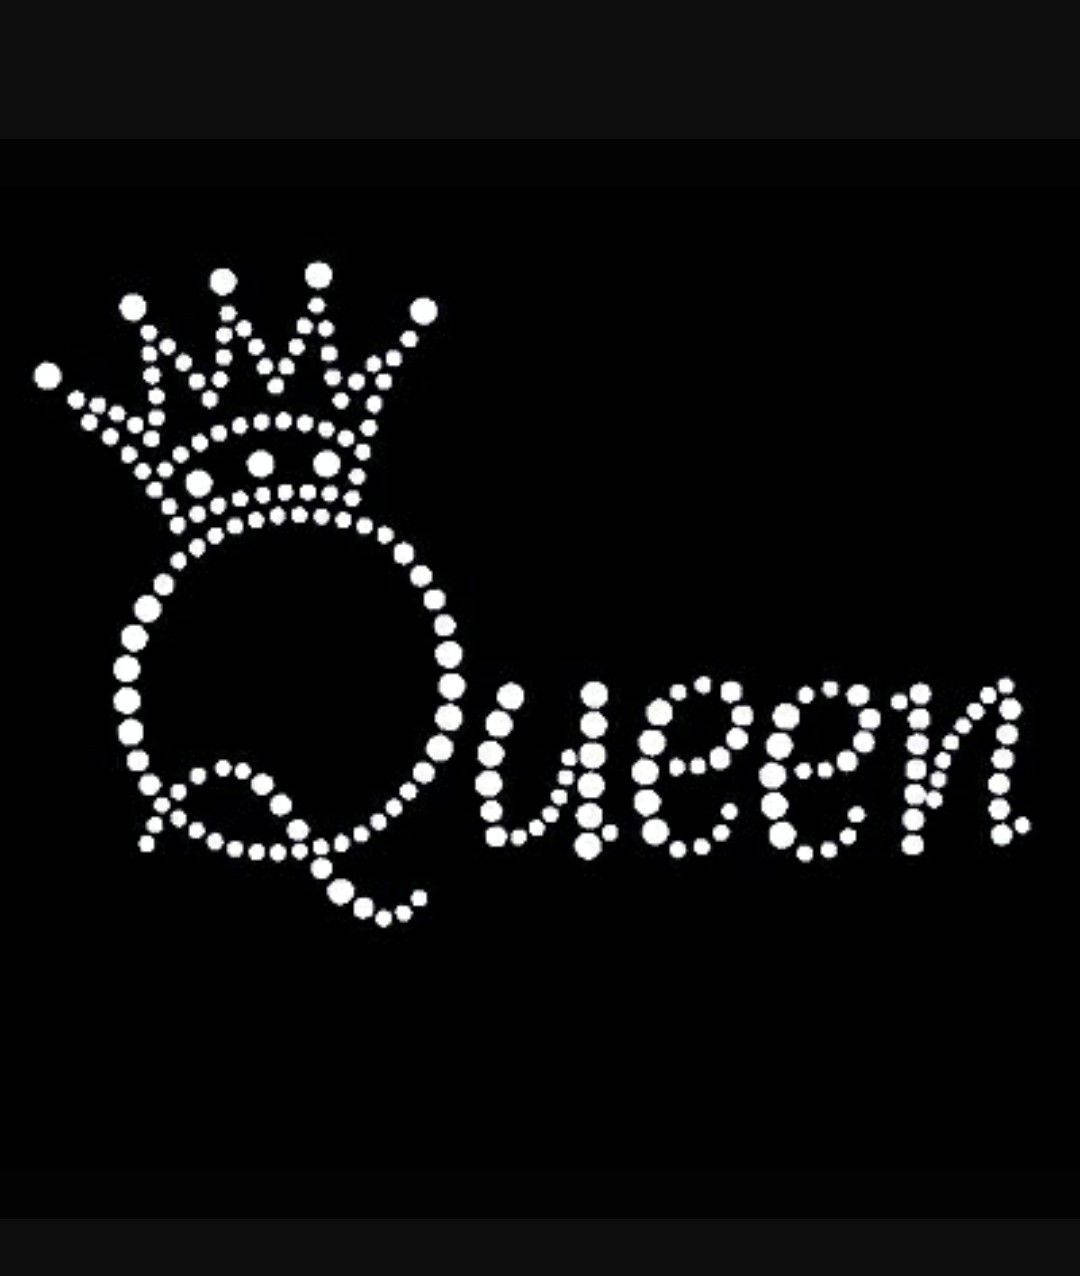 Studded Black Queen Background